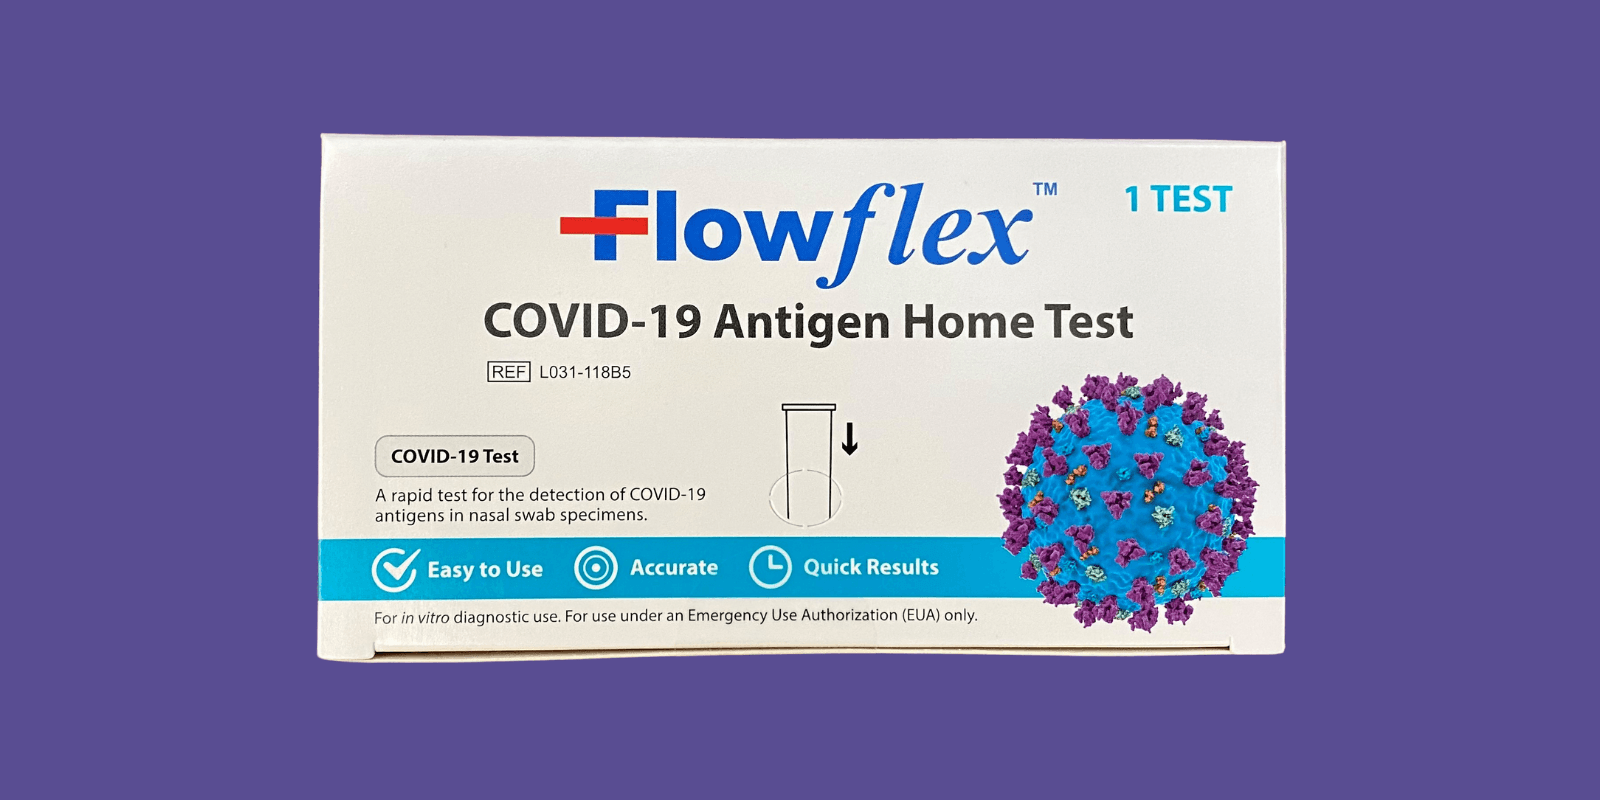 Free COVID-19 At-Home Test Kits available at Central Library & Page Public Library